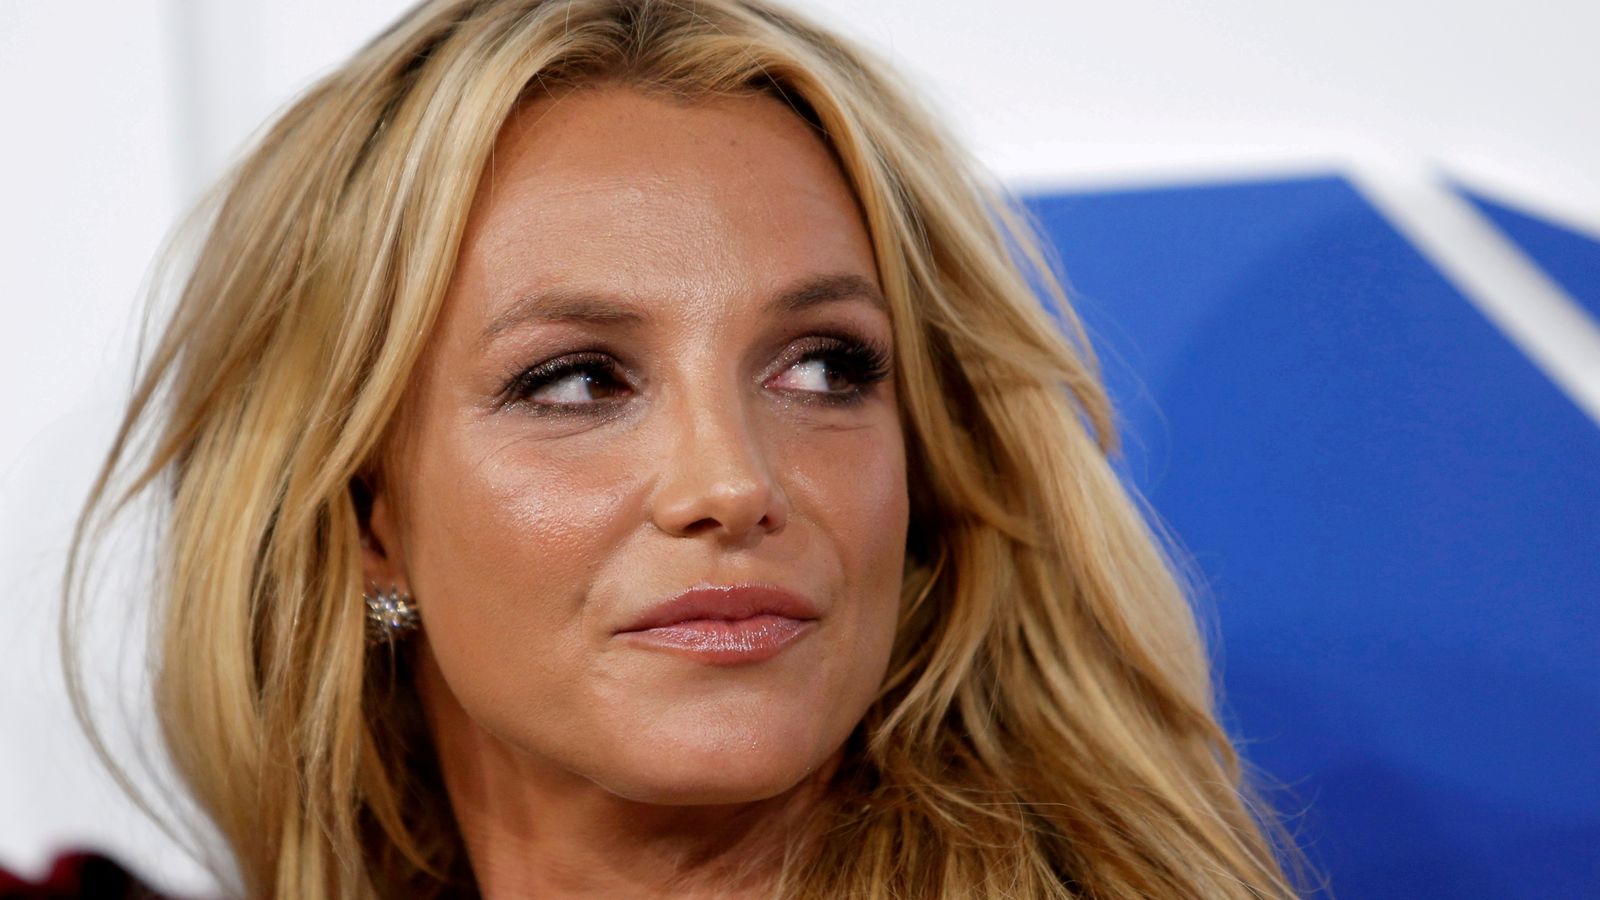 Britney Spears hits out at people closest to her who ‘never showed up’ amid conservatorship battle